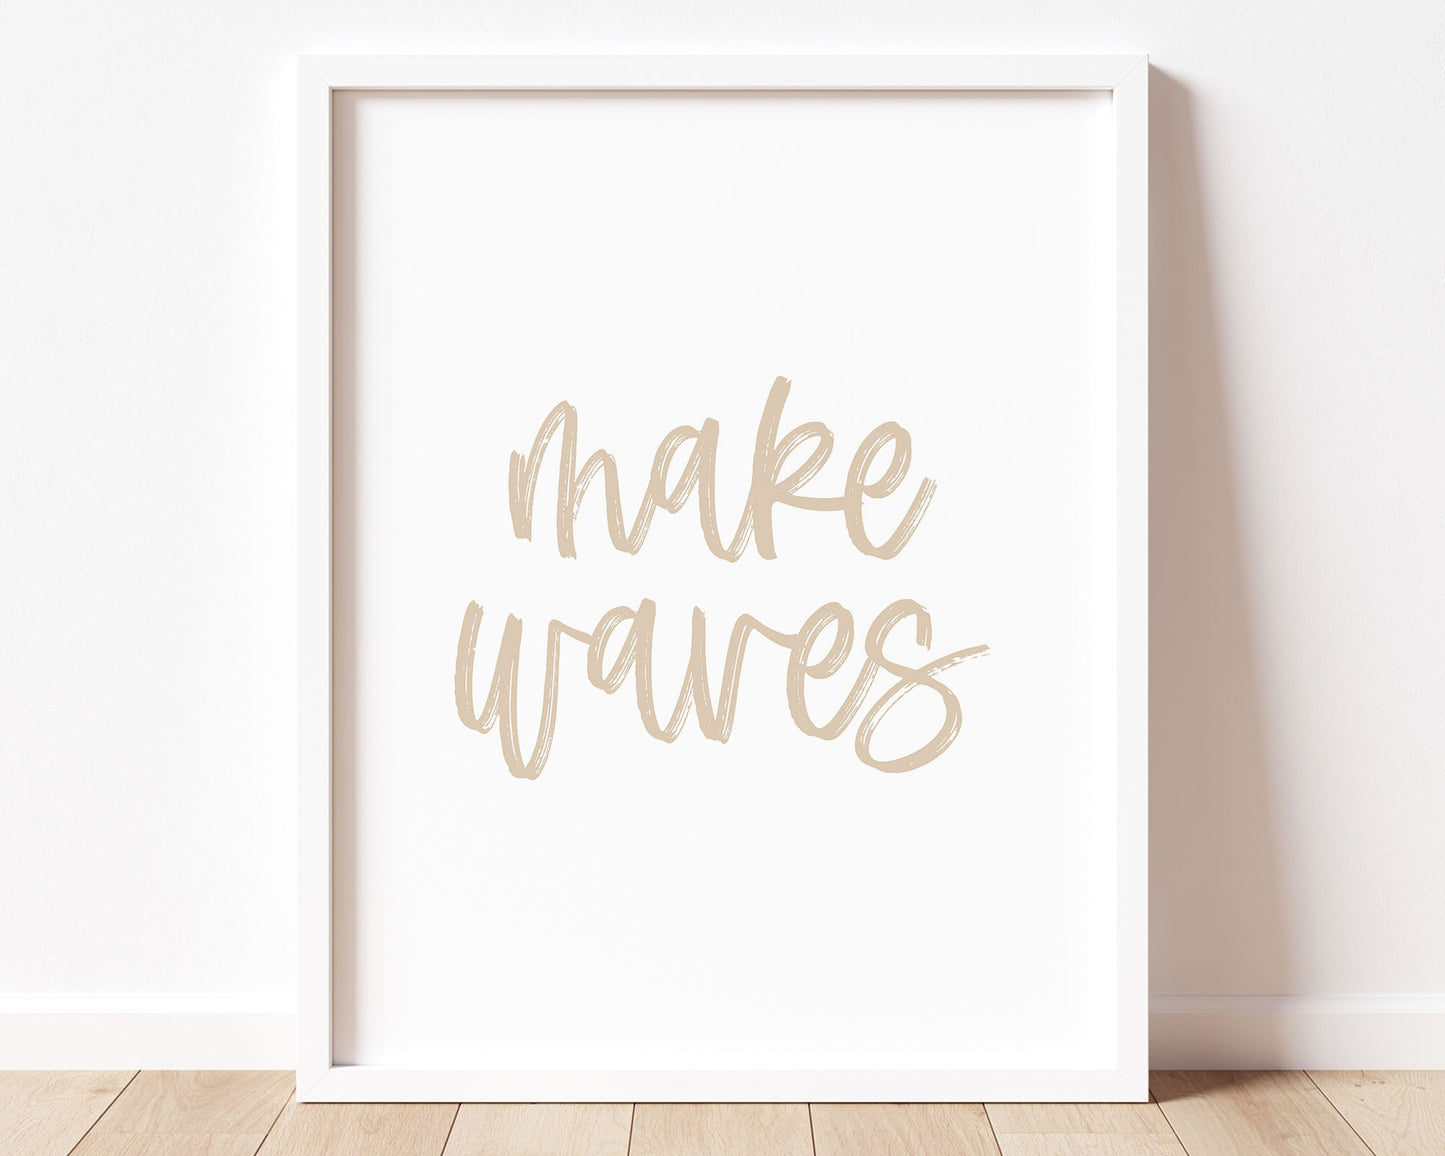 Neutral Tan Make Waves Printable Wall Art featuring a textured brush style cursive lettered quote.